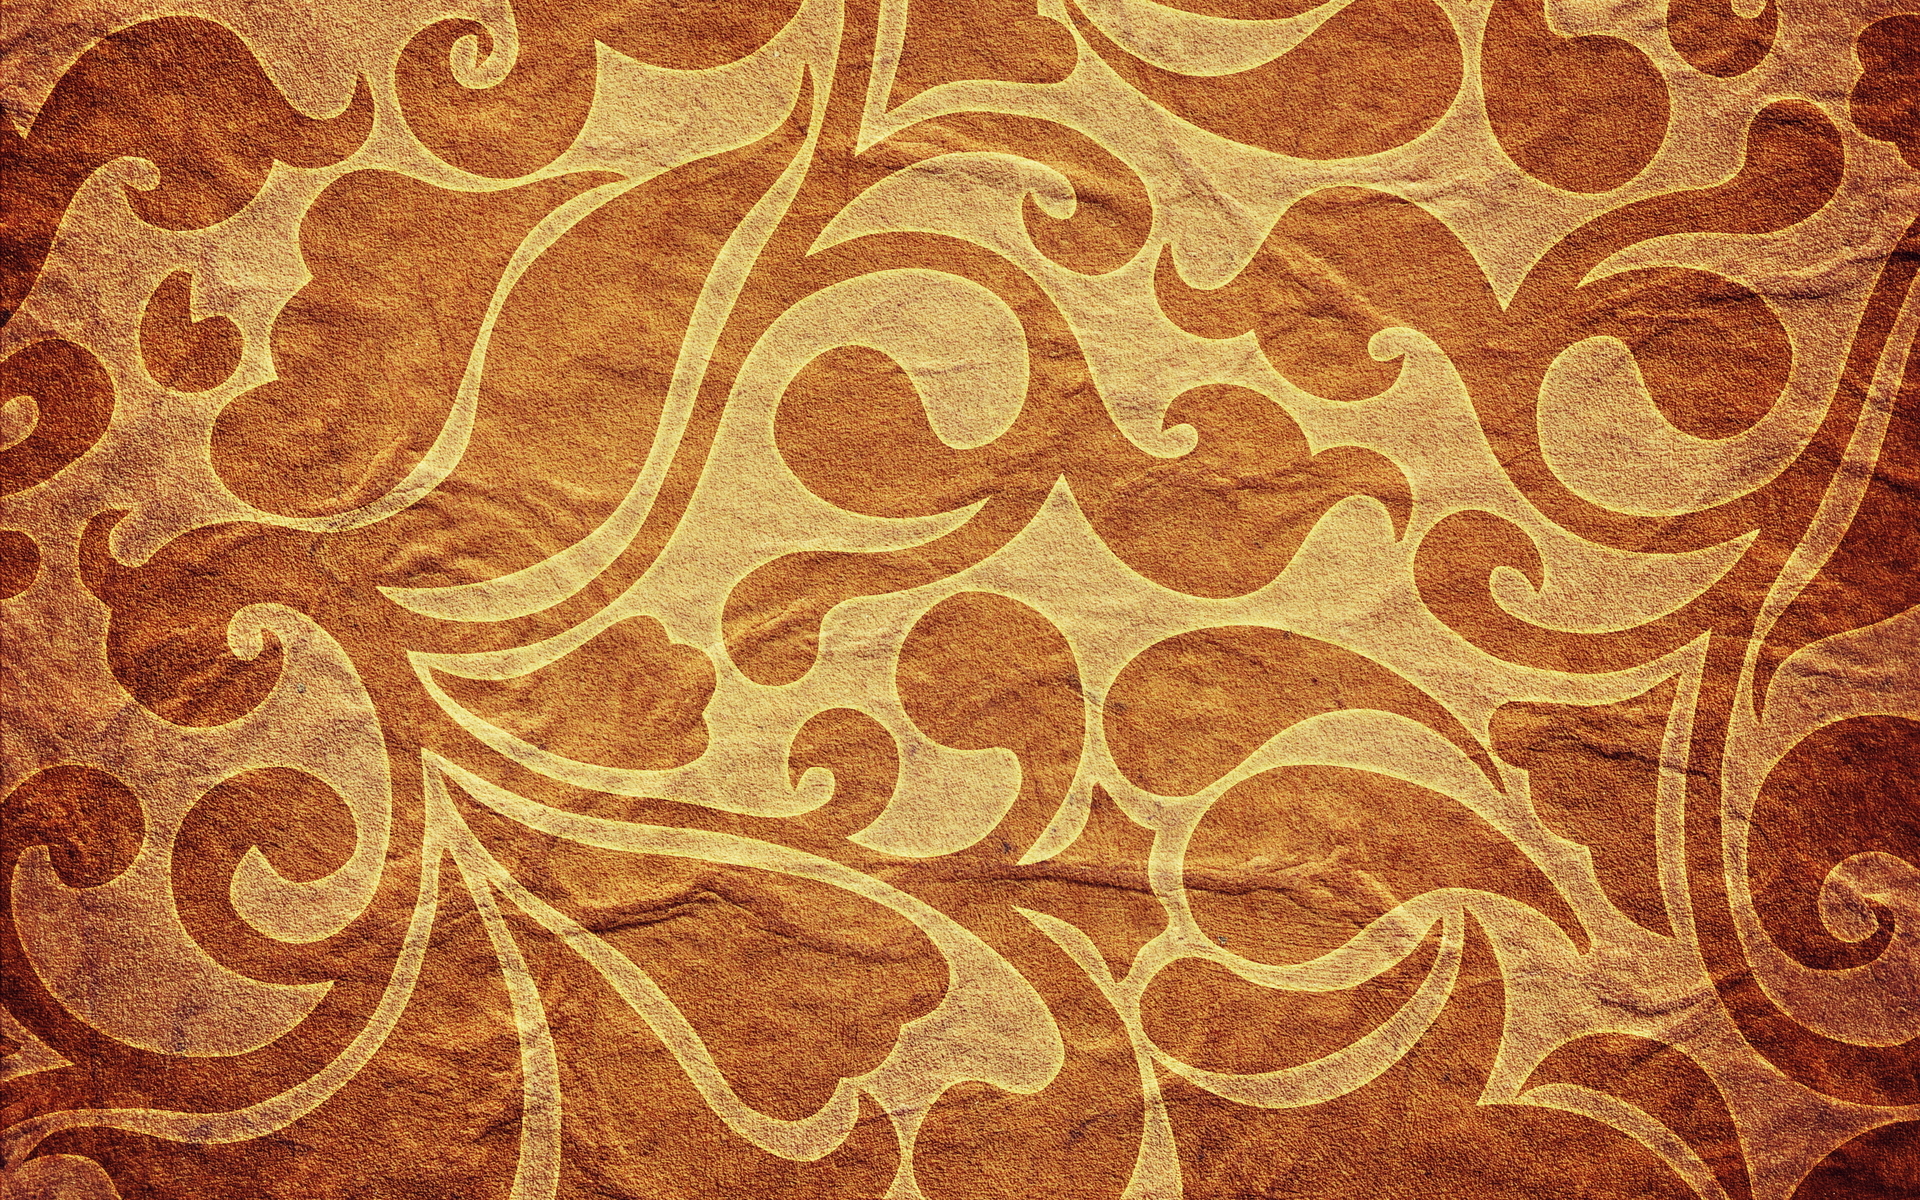 Abstract Backgrounds In High Quality: Texture Background by Naomi ...